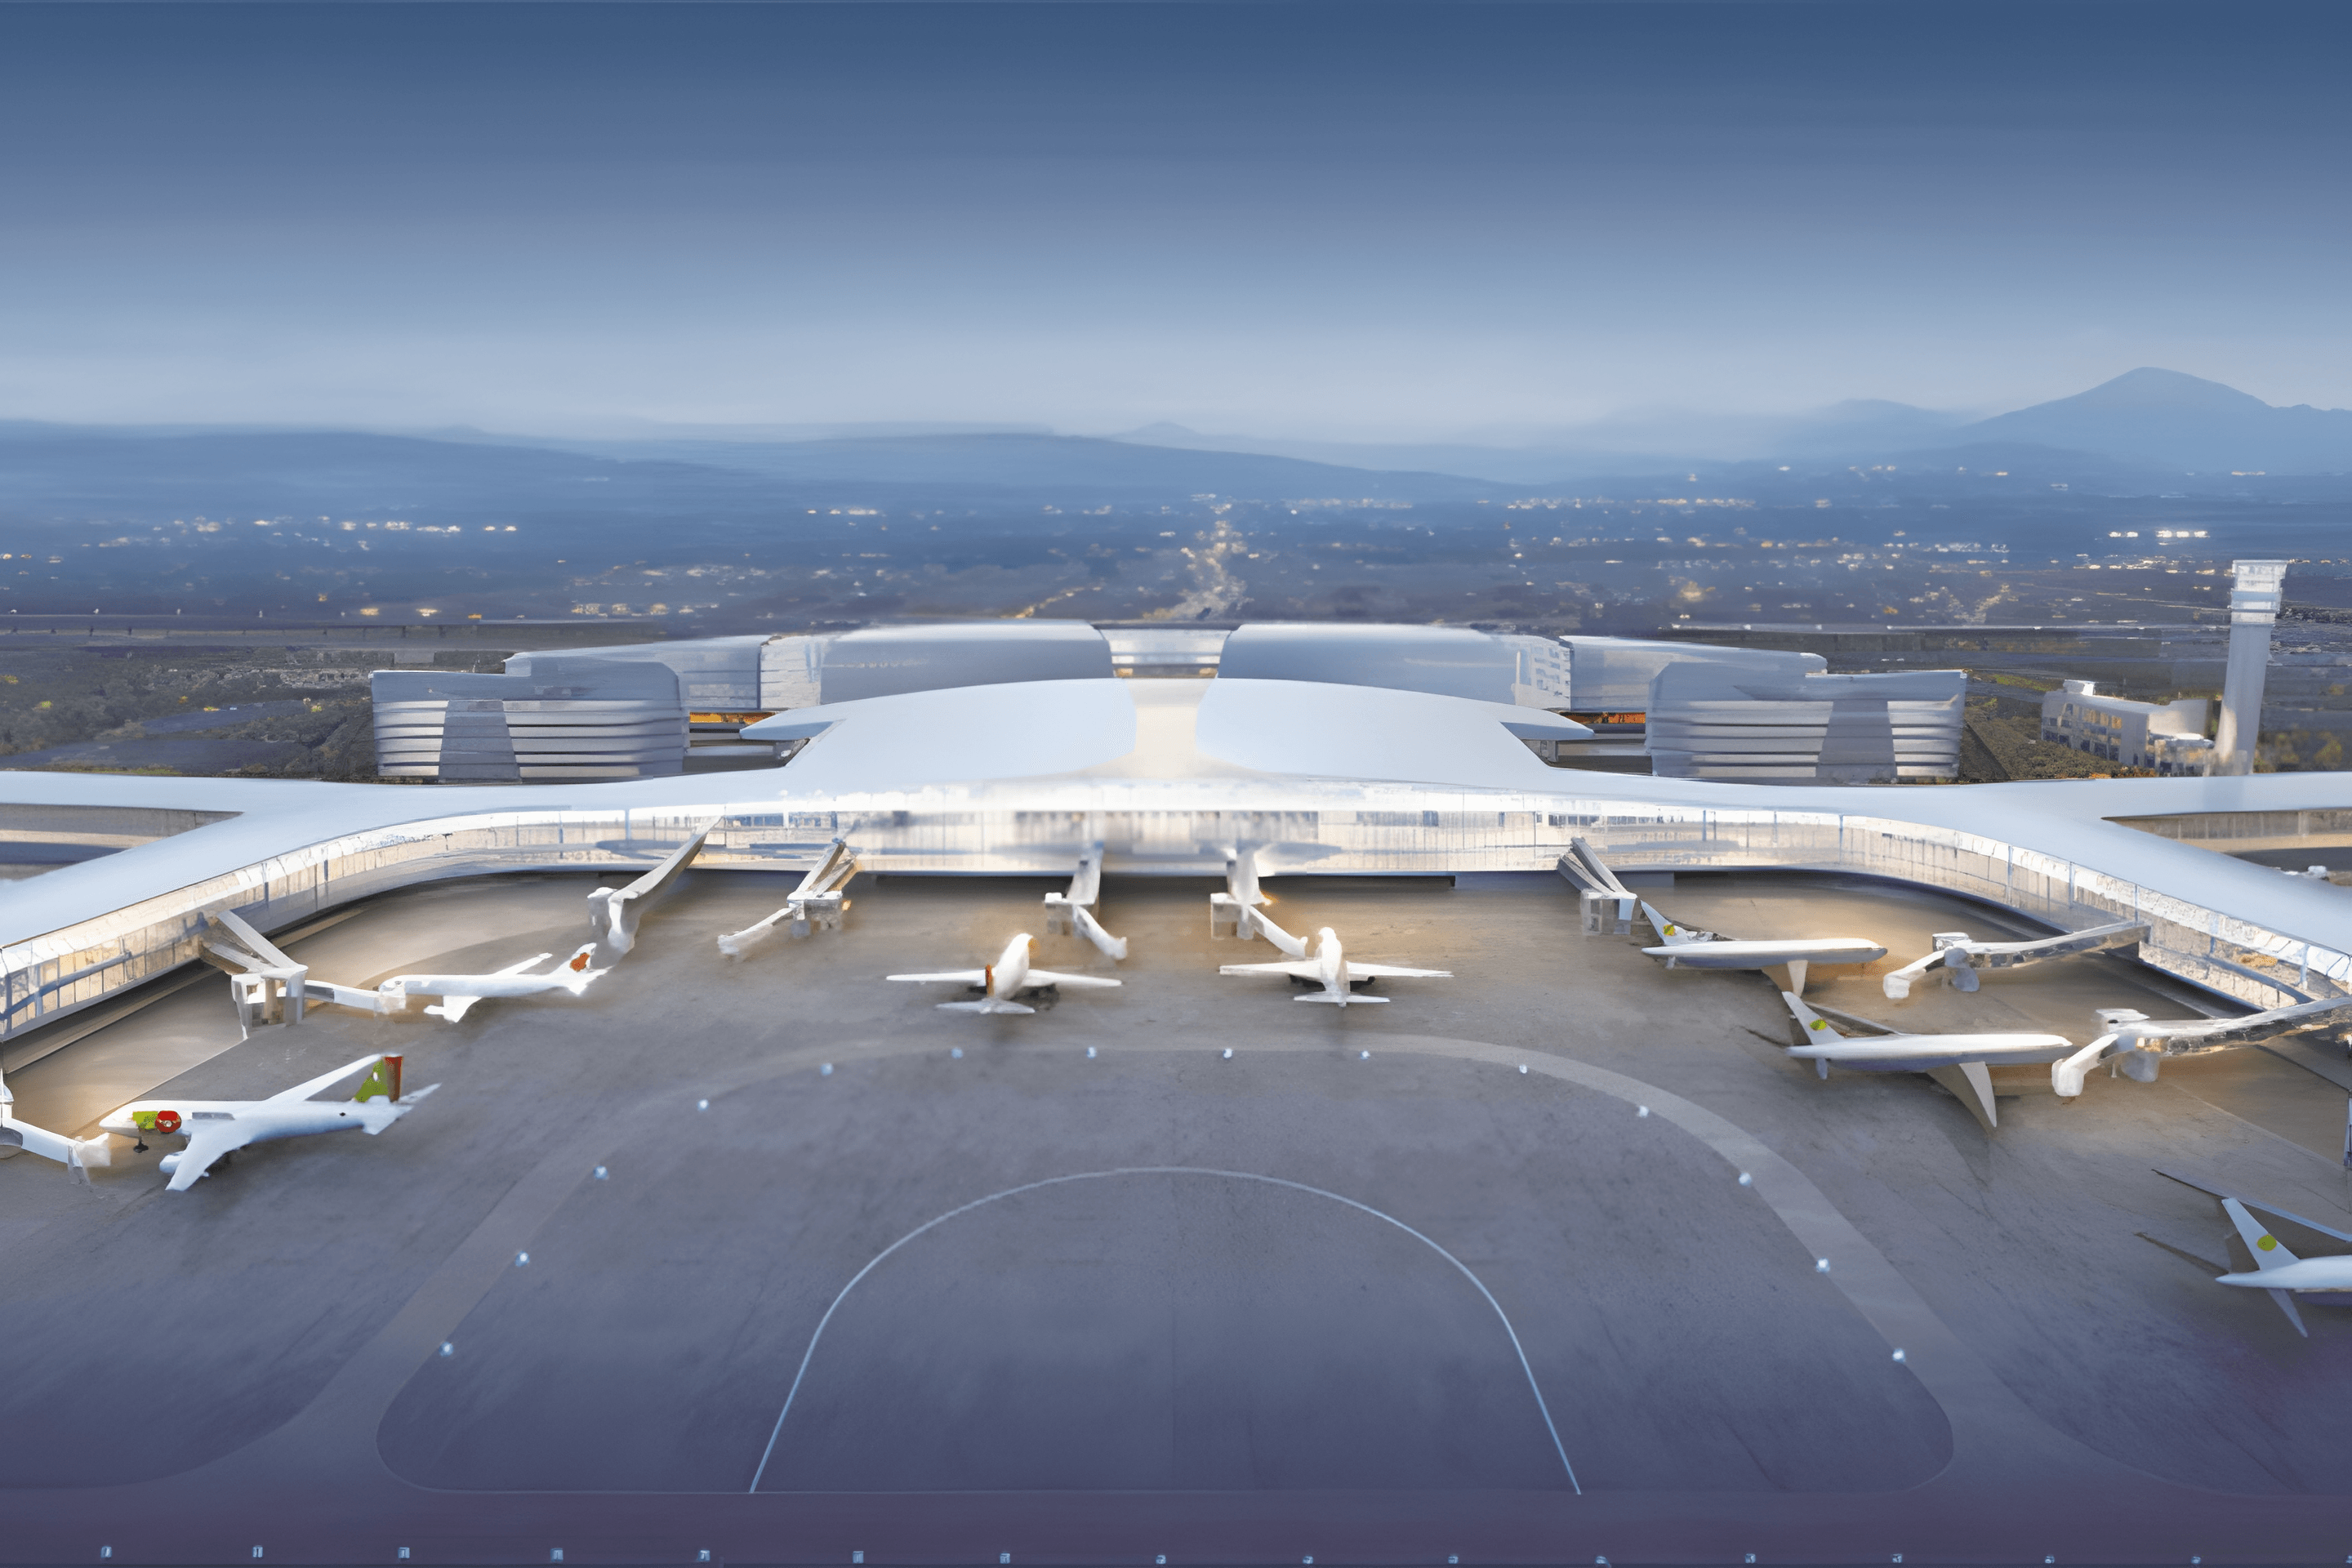 New intercontinental flight route to connect Wenzhou, Madrid